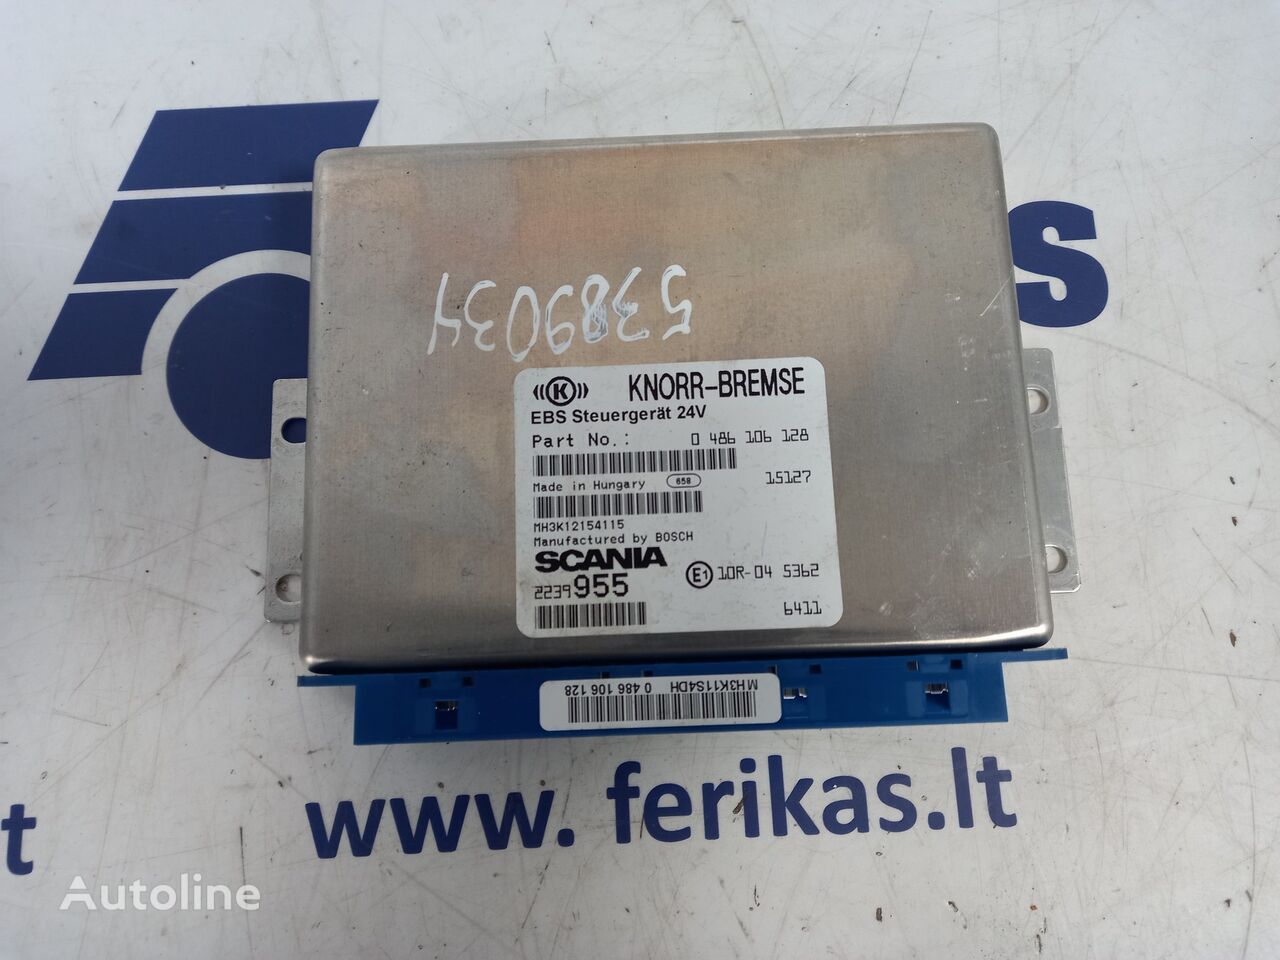 Scania EBS control unit for Scania truck tractor